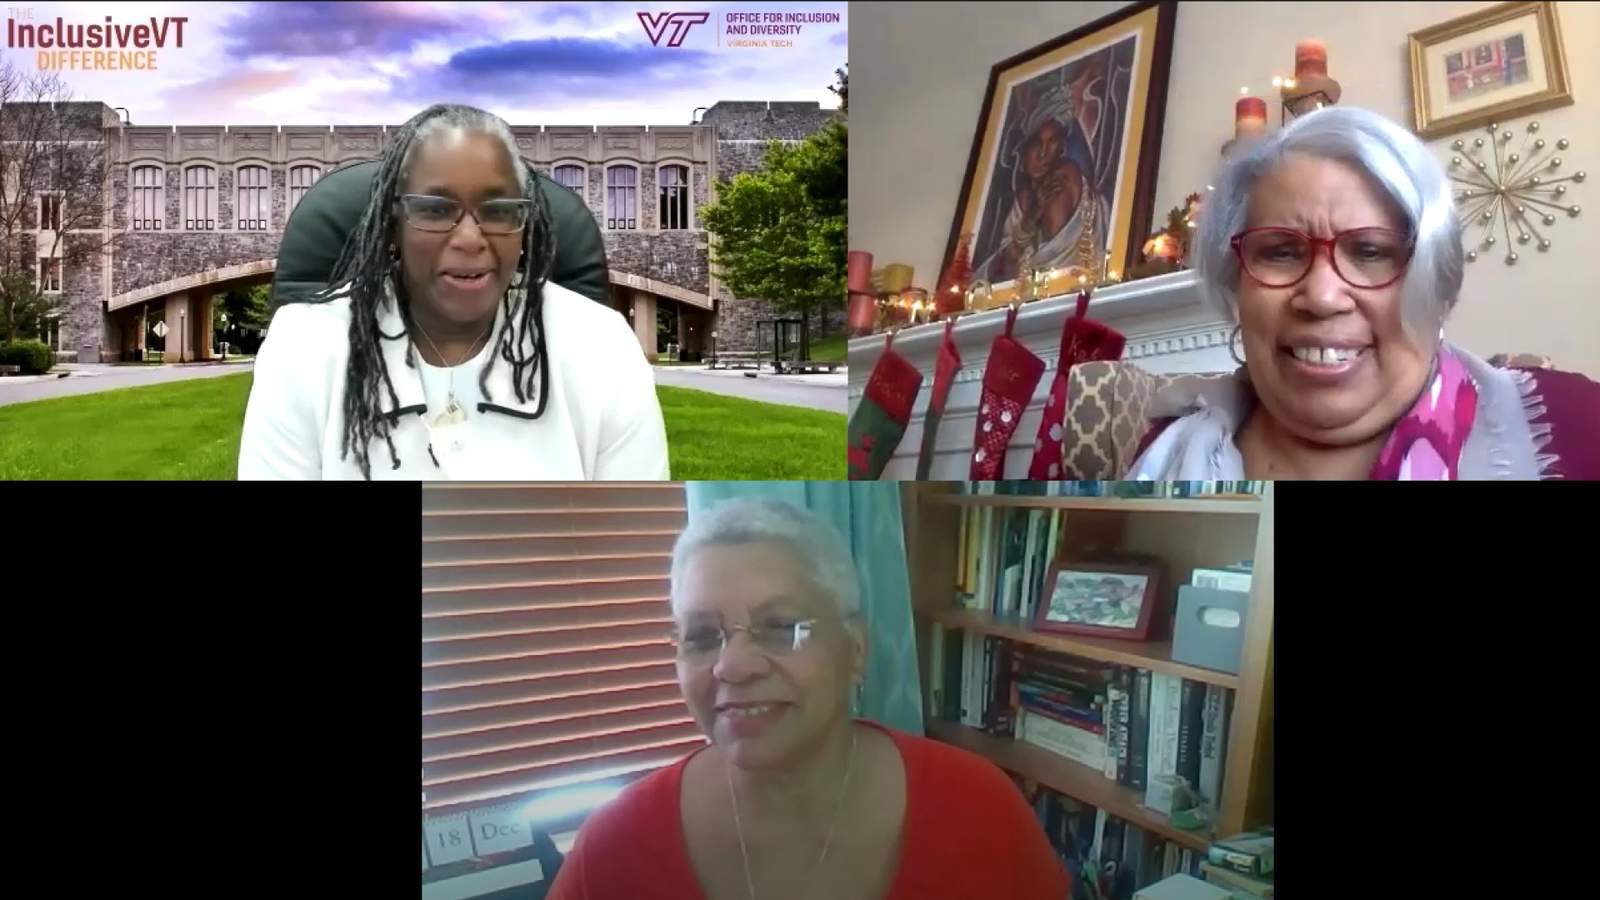 Two of the first Black women to attend Virginia Tech discuss their experience